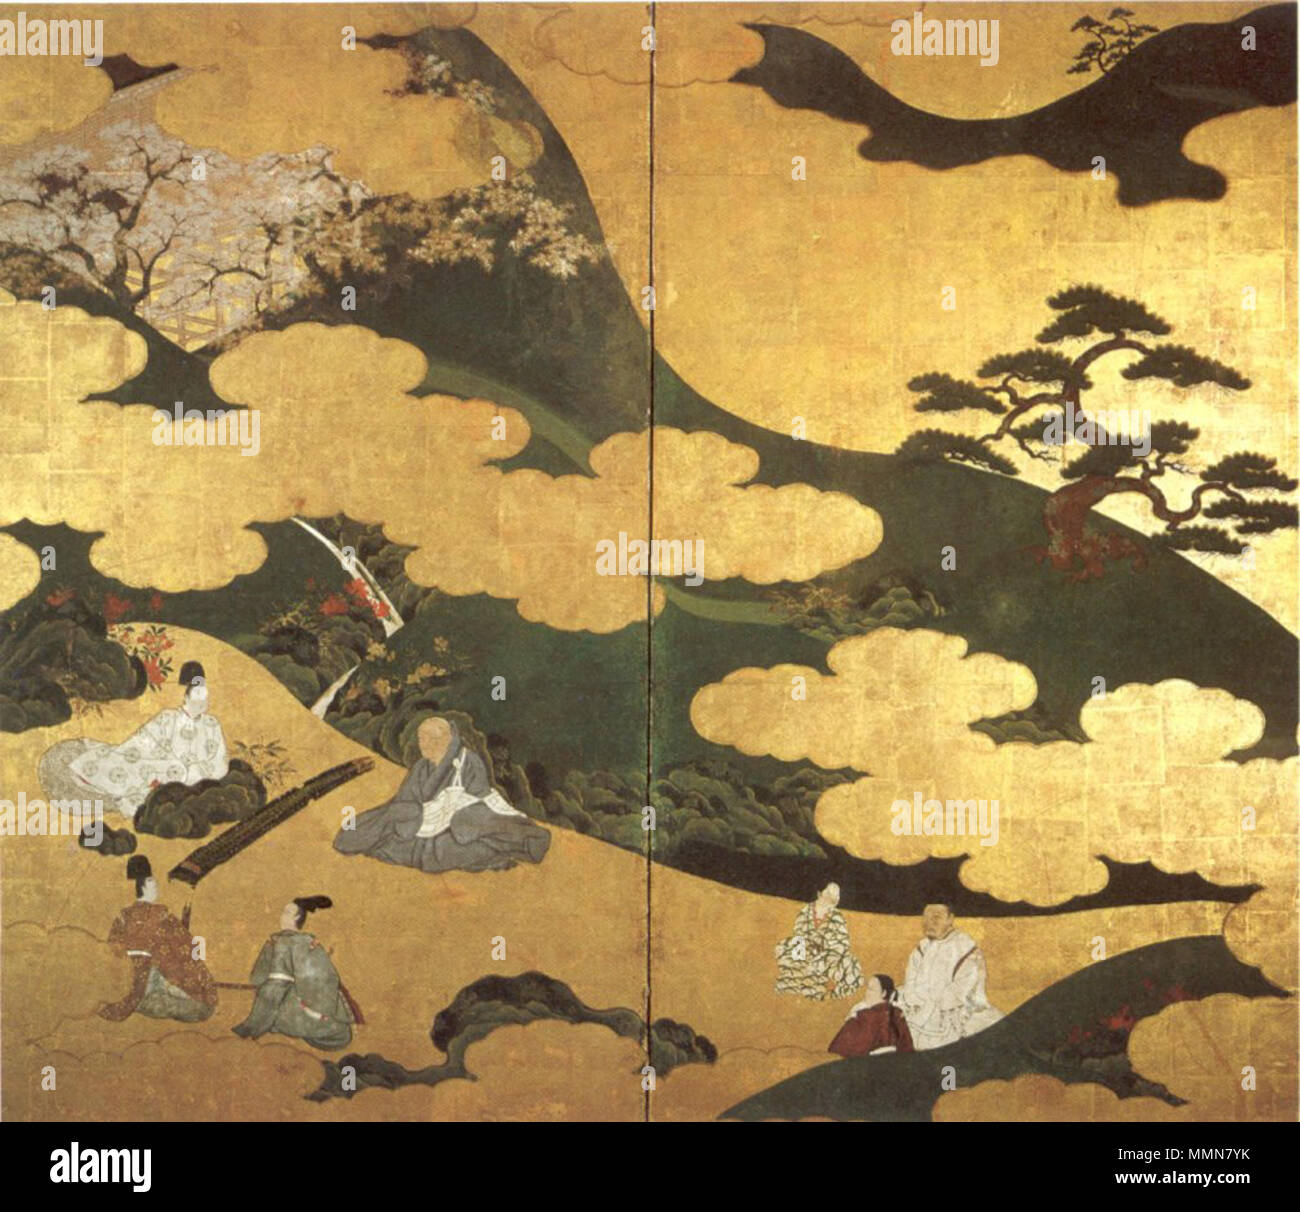 .  English: Genji Monogatari (Tale of Genji), ink and color on gold paper mounted as a two-panel screen attributed to Tosa Mitsuyoshi, 16th or early 17th century Japanese, Honolulu Academy of Arts  . 16th or early 17th century. 'Genji Monogatari' (Tale of Genji), ink and color on gold paper mounted as a two-panel screen attributed to Tosa Mitsuyoshi Stock Photo